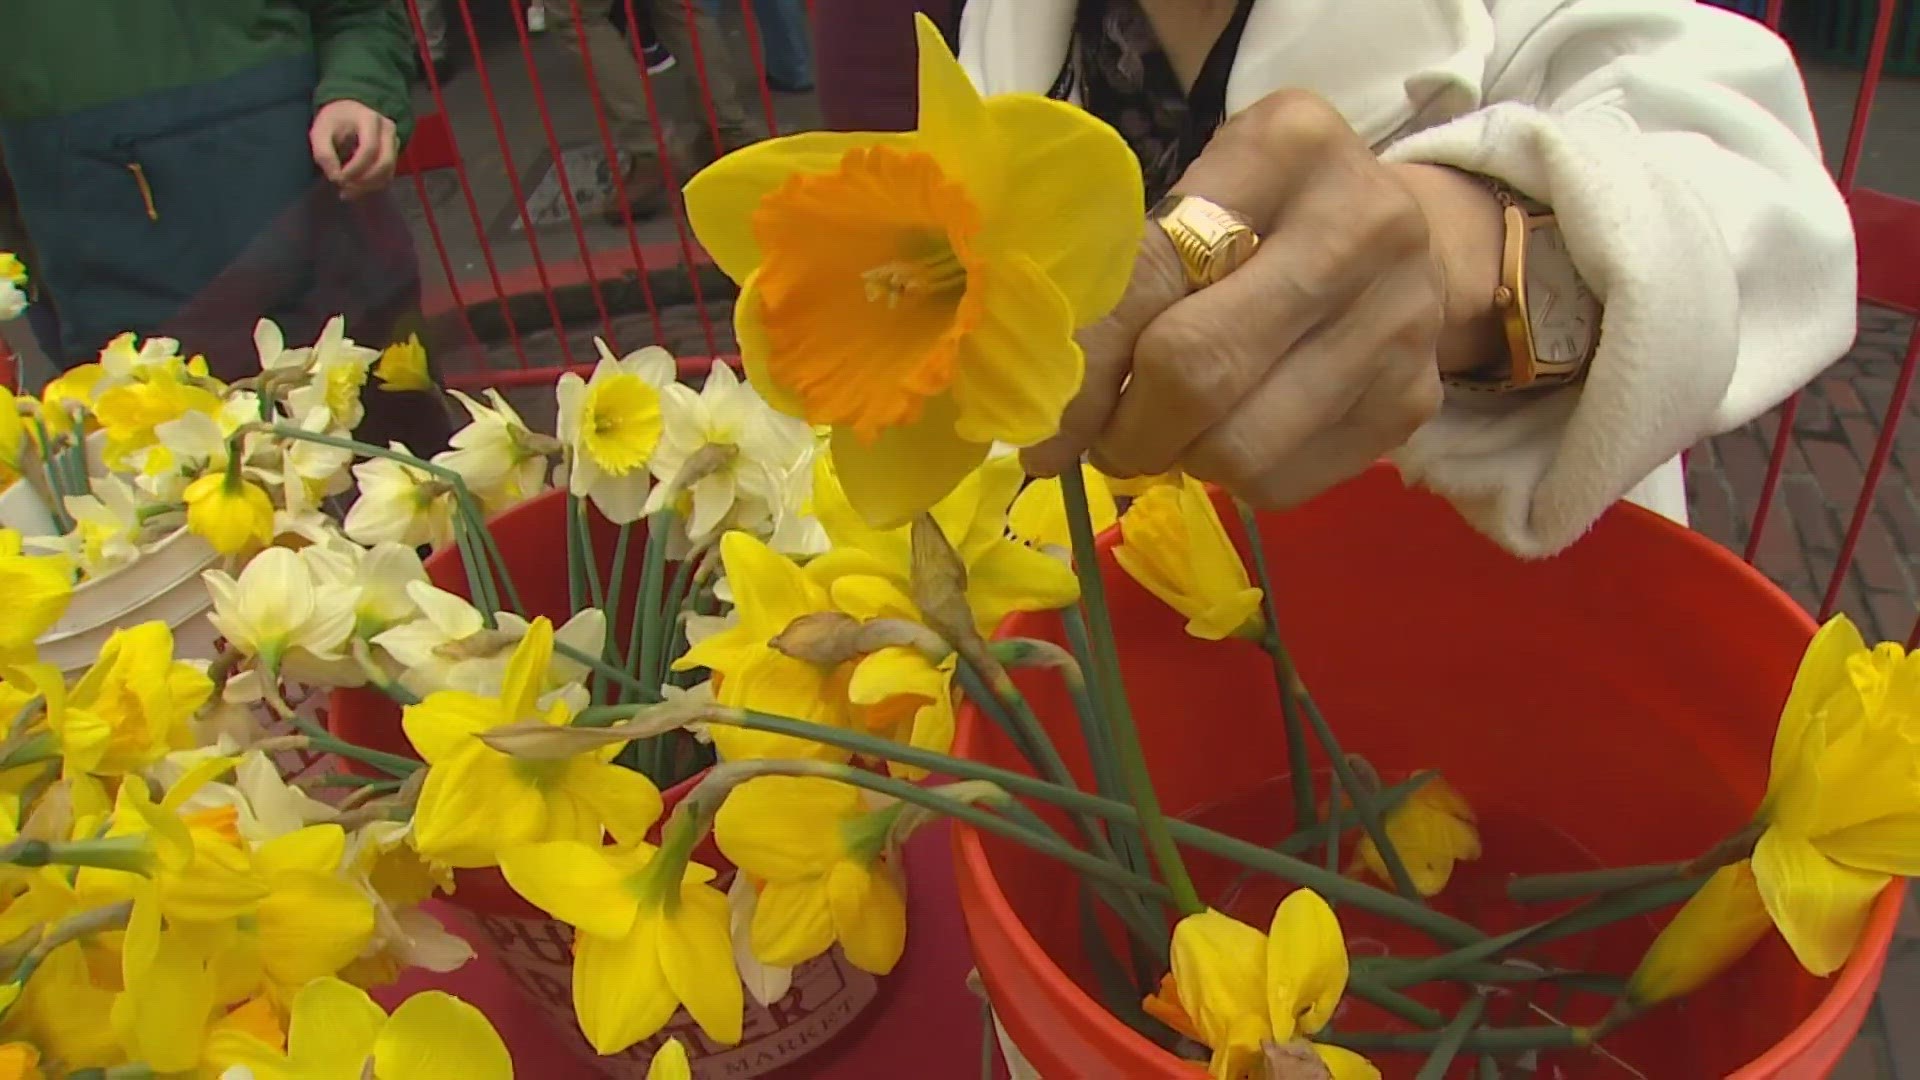 The market had bouquets to hand out to visitors on the 26th annual event.